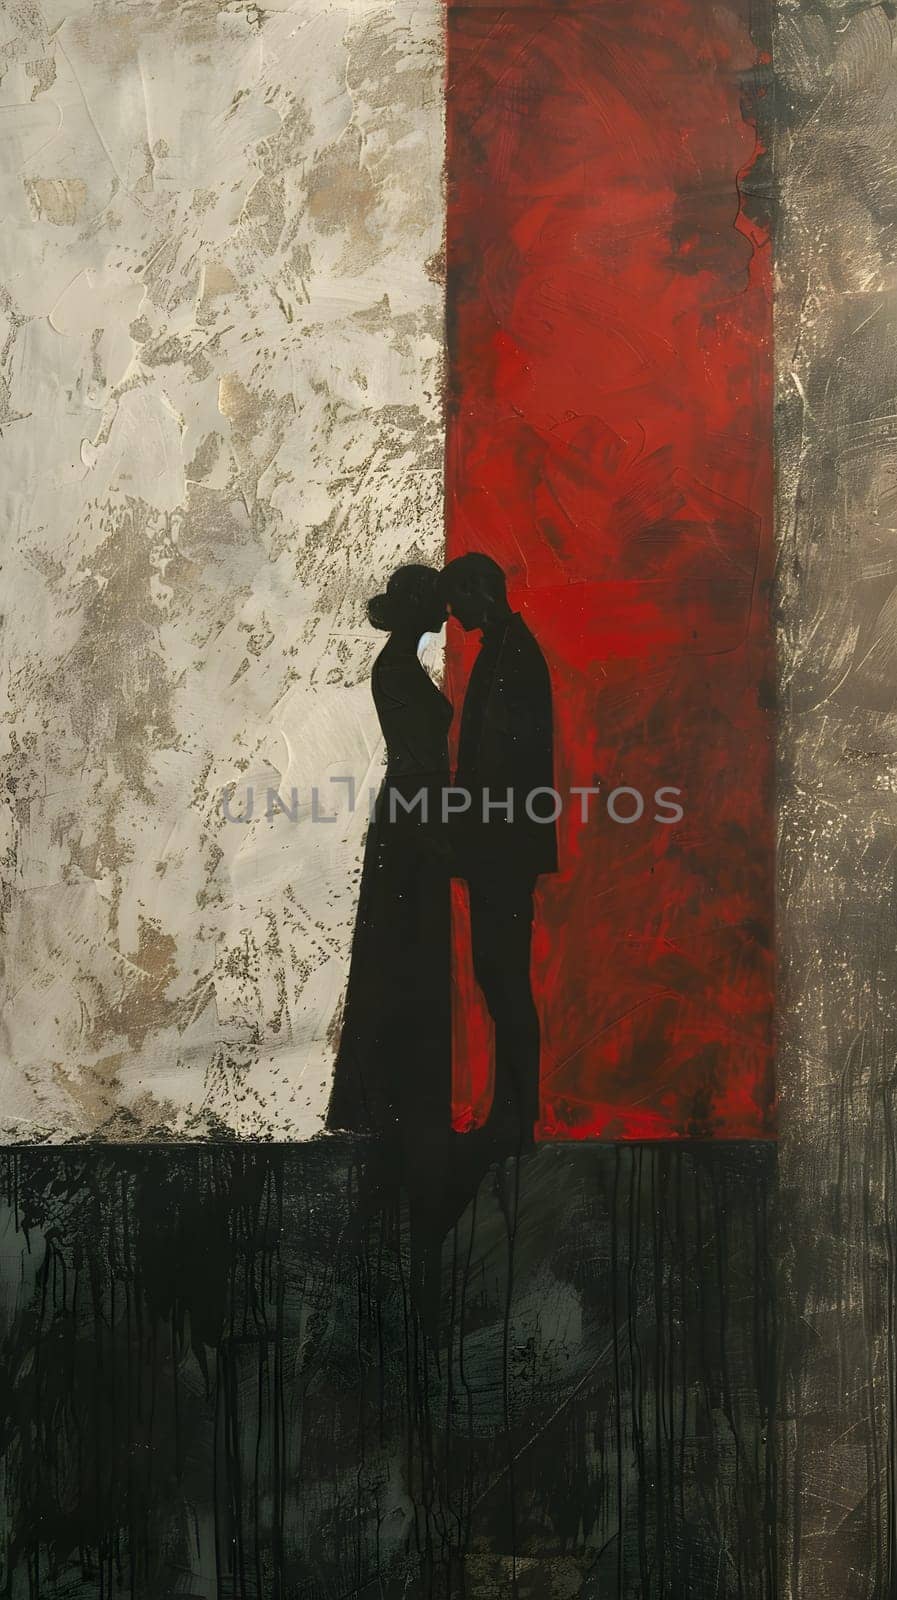 A couple kissing in front of a red brick wall painting. The vibrant magenta tint contrasts with the wood door and surrounding tree, creating a romantic scene in visual arts